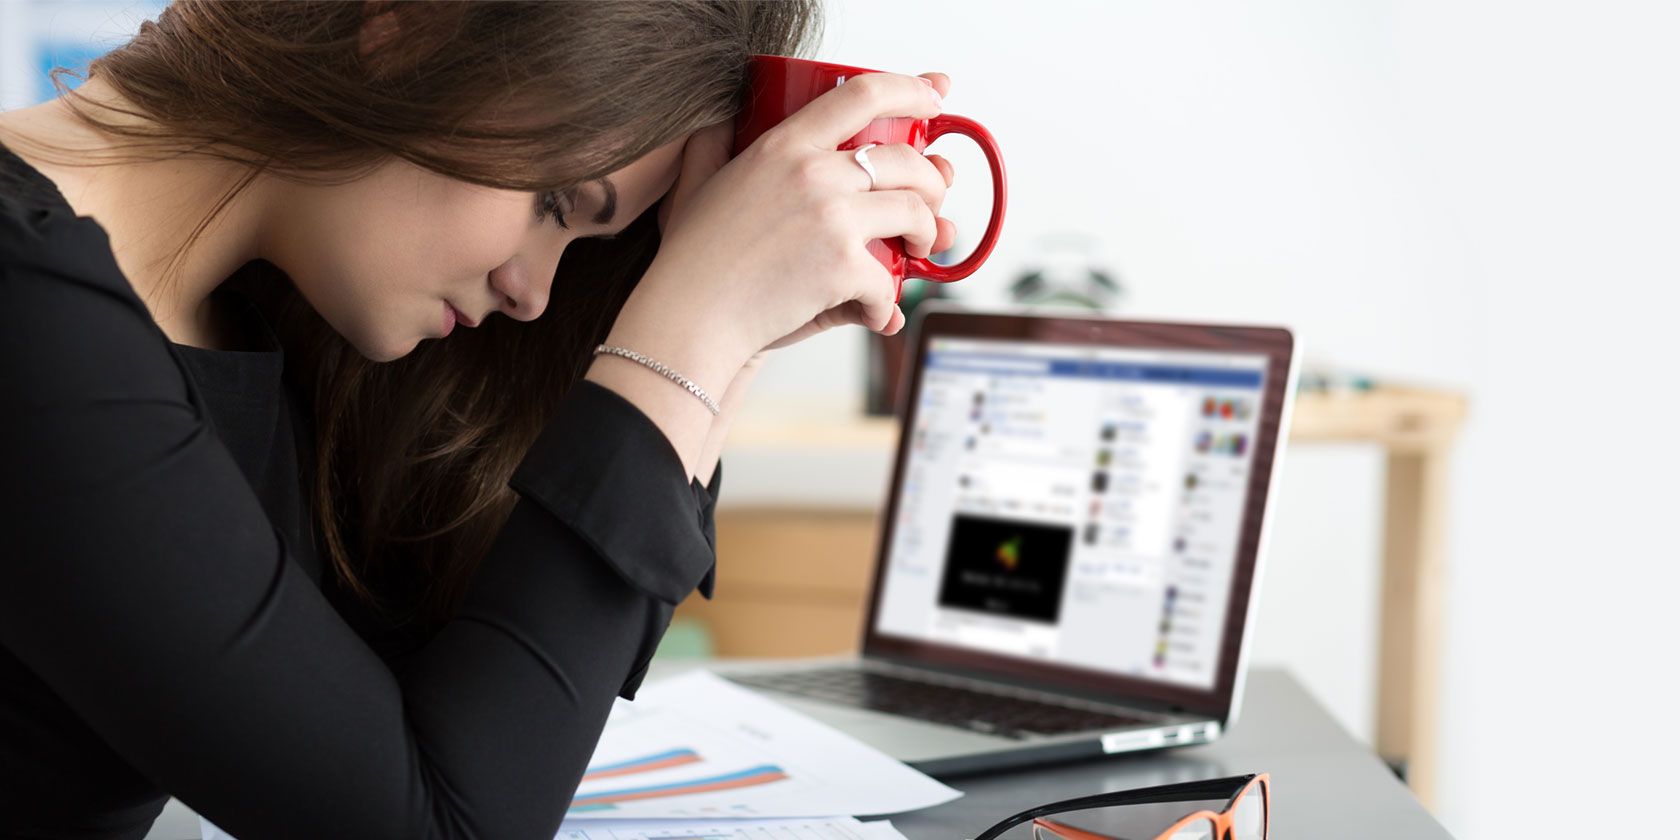 Why Social Media And Depression Are Not Directly Linked